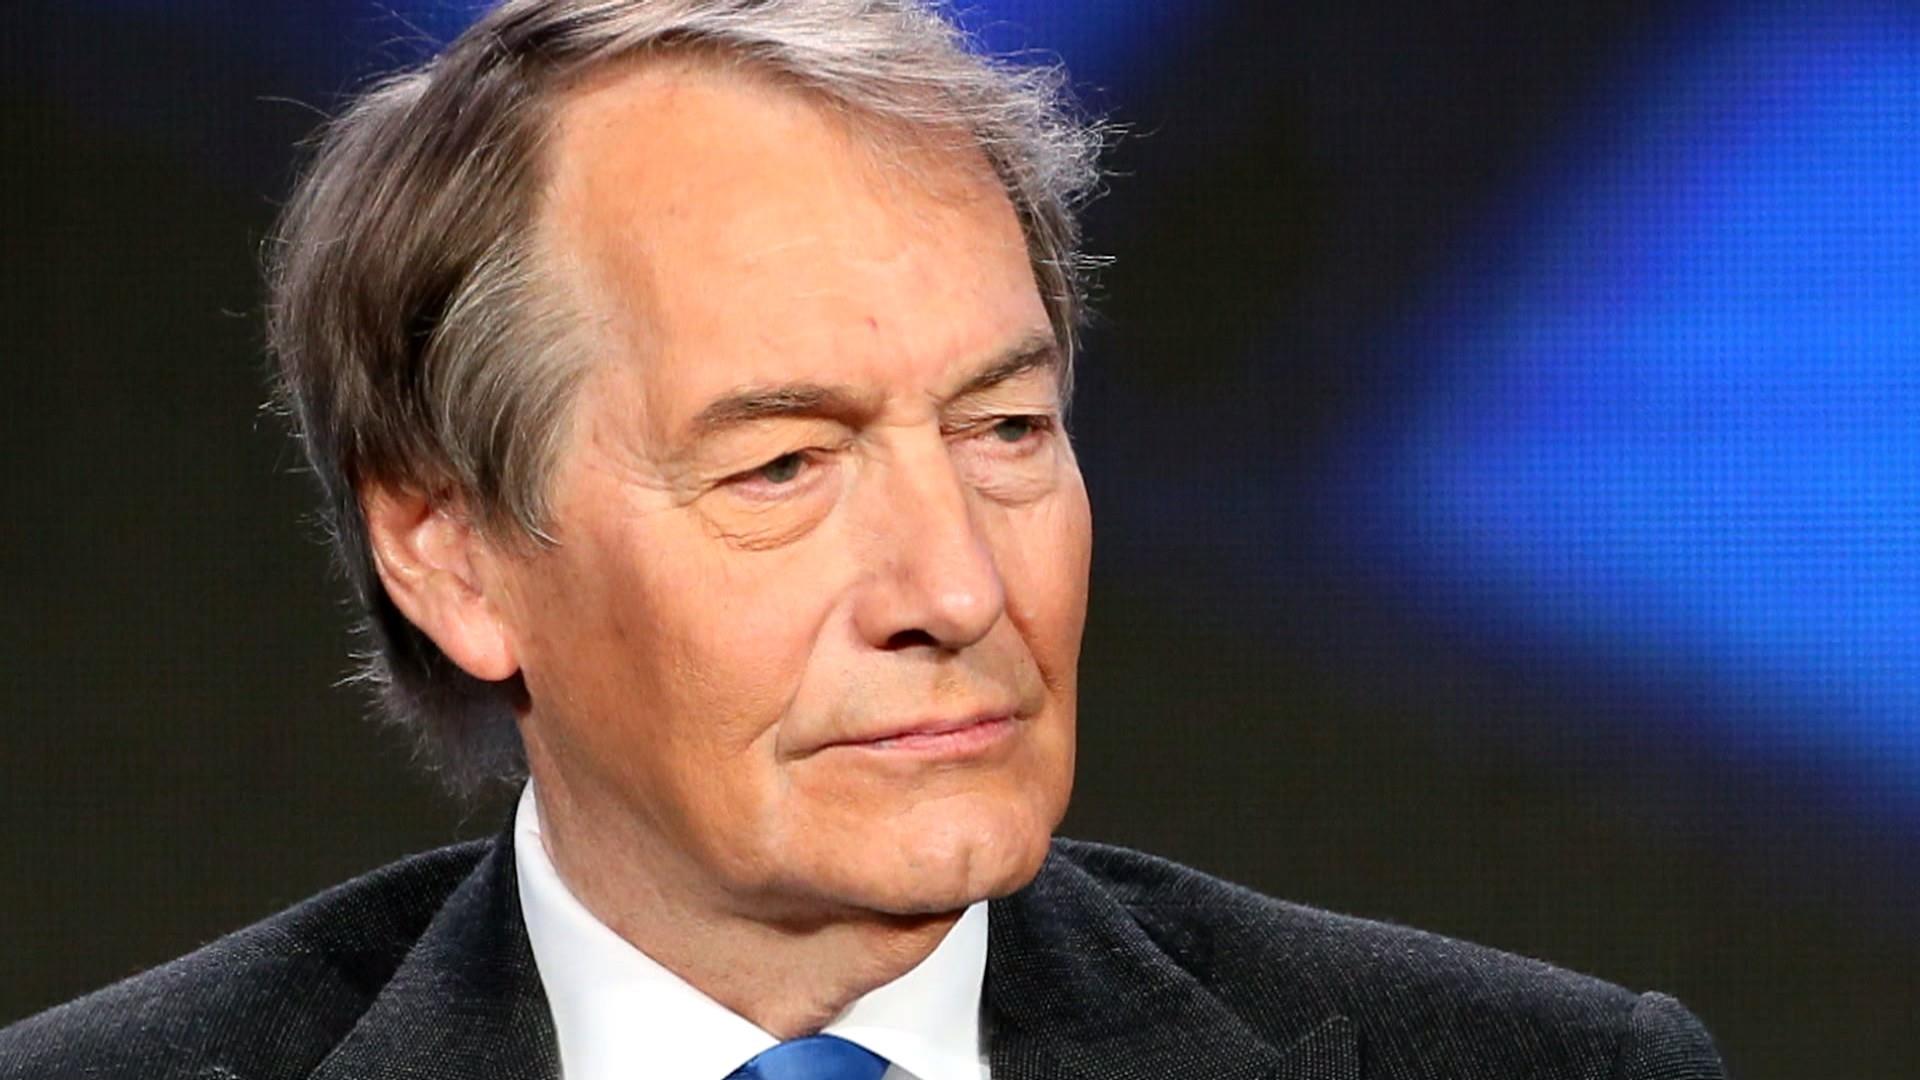 Charlie Rose sexual misconduct allegations prompt a new lawsuit